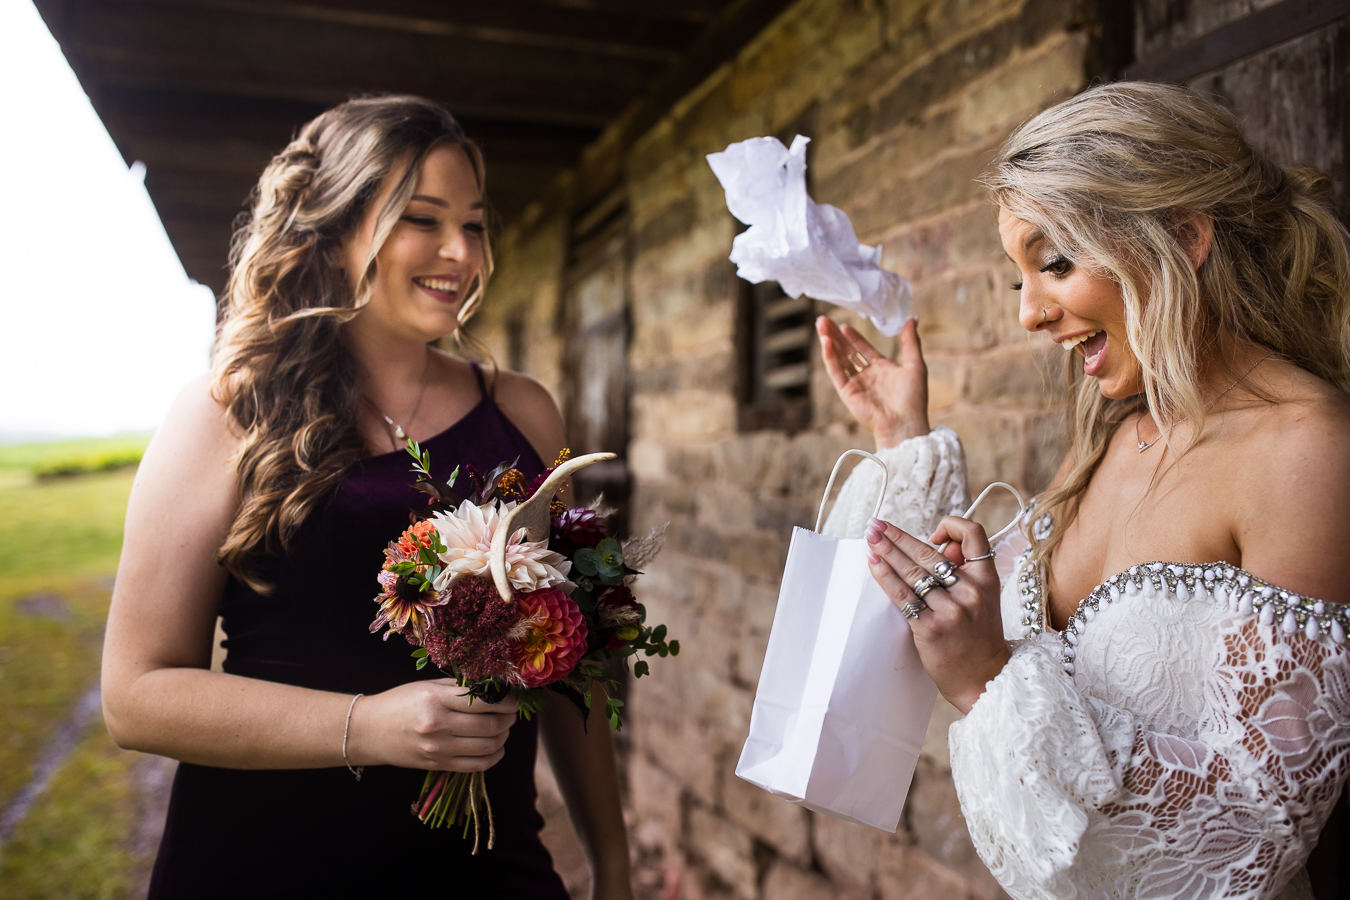 fun, candid image of the bride as she opens a gift from her bridesmaid and looks happy and surprised as she throws the tissue paper before her outdoor wedding ceremony 